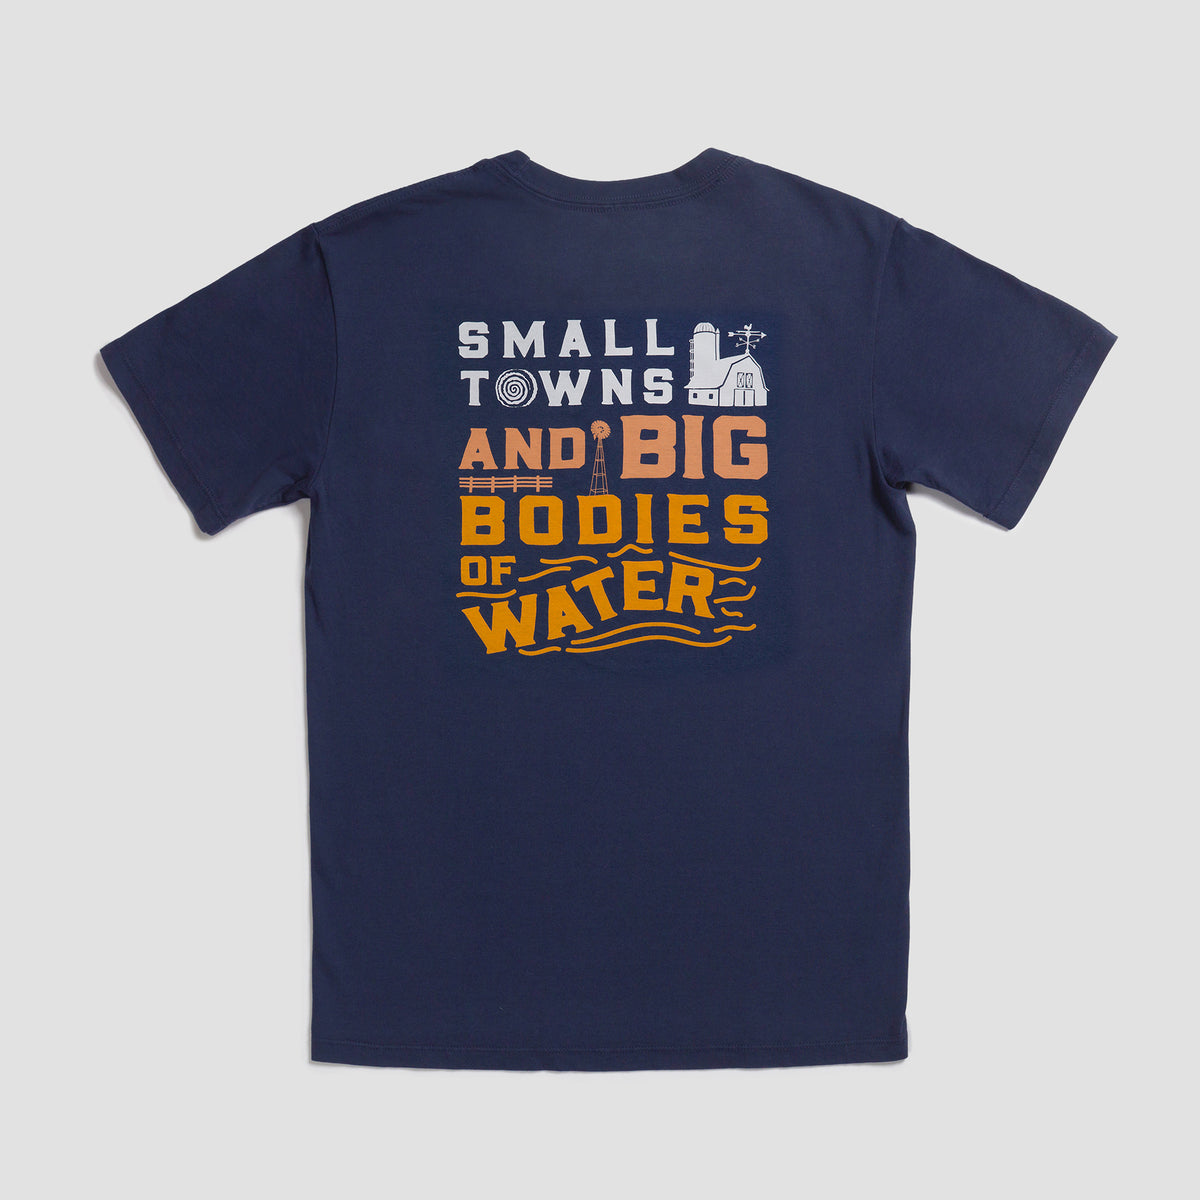 Small Towns &amp; Big Bodies of Water Tee Shirt